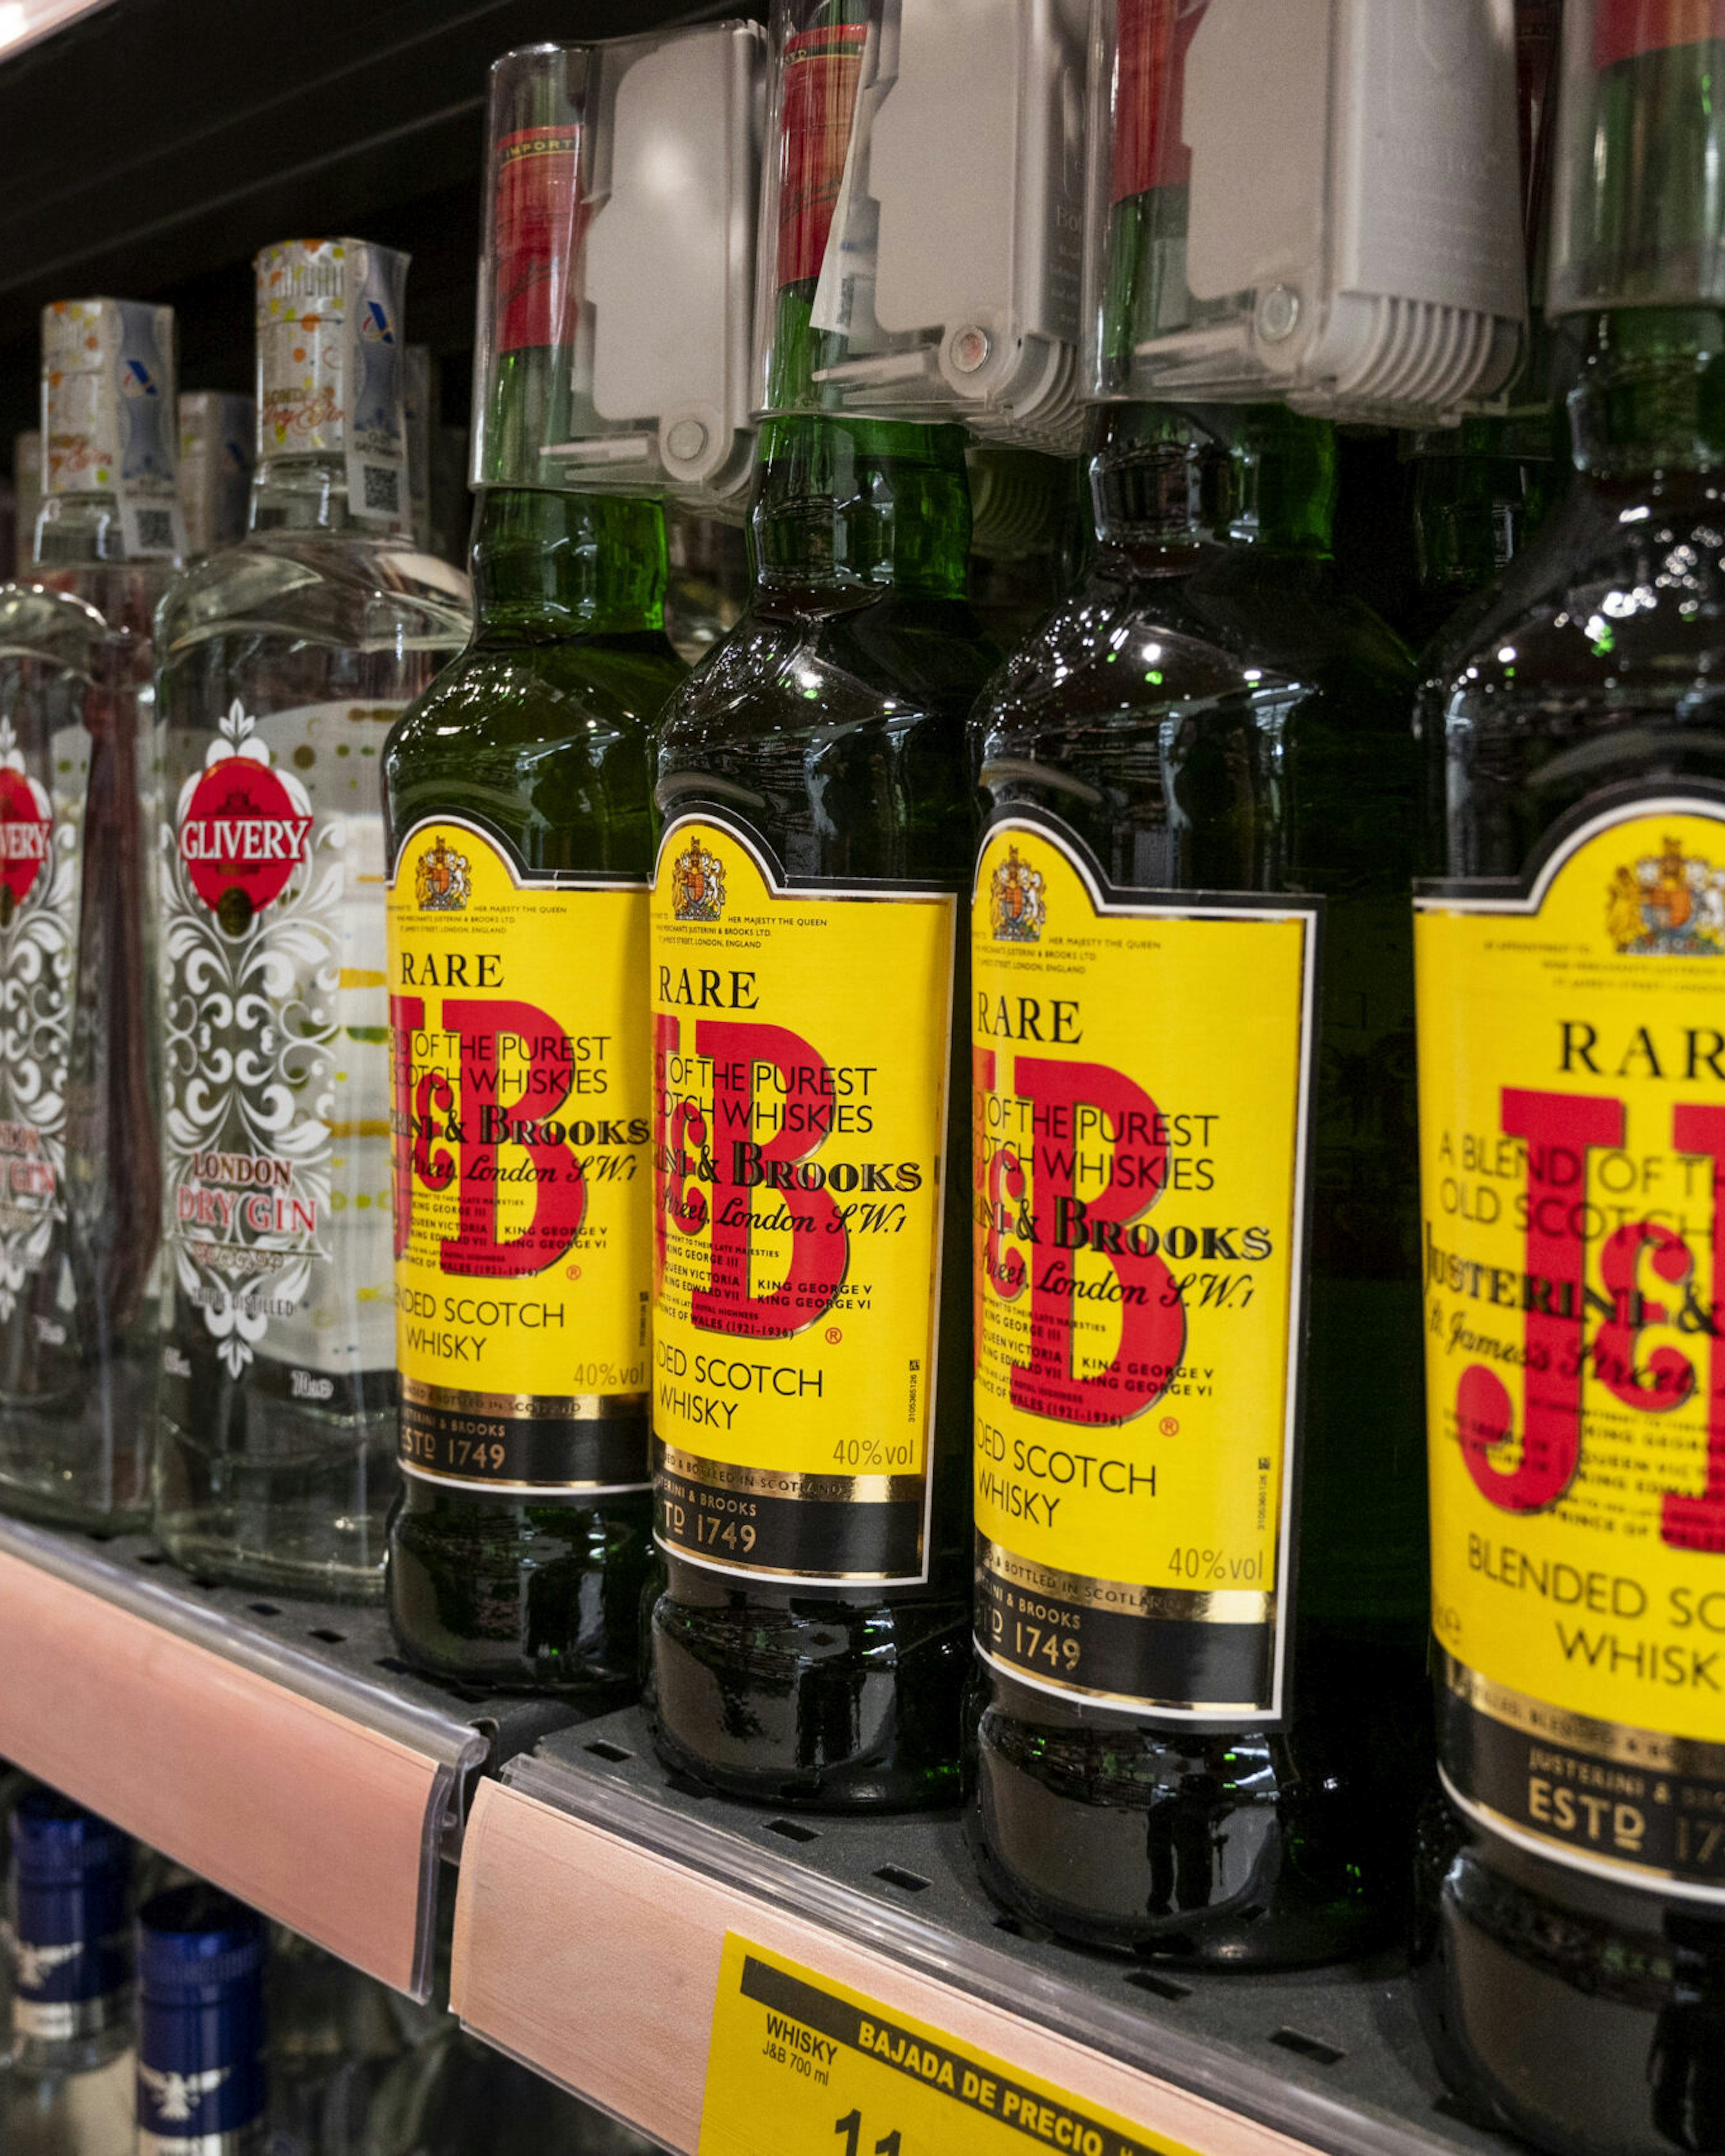 Bottles of Scotch Whisky brand, J&amp;B, rare blend label seen for sale at a supermarket in Spain.